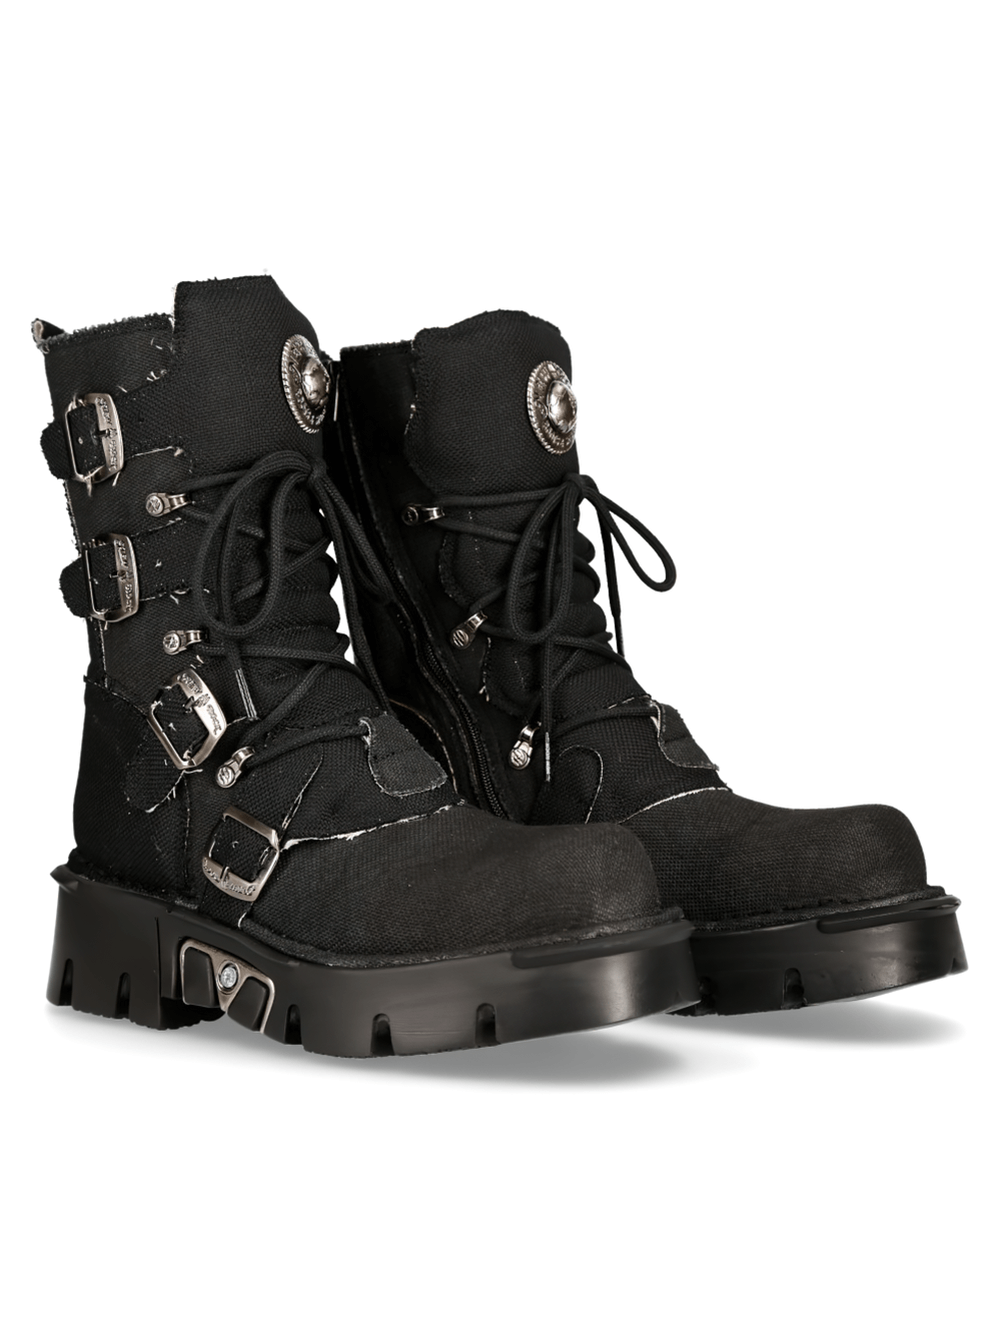 NEW ROCK Black Rock Buckled Boots with Gothic Flair